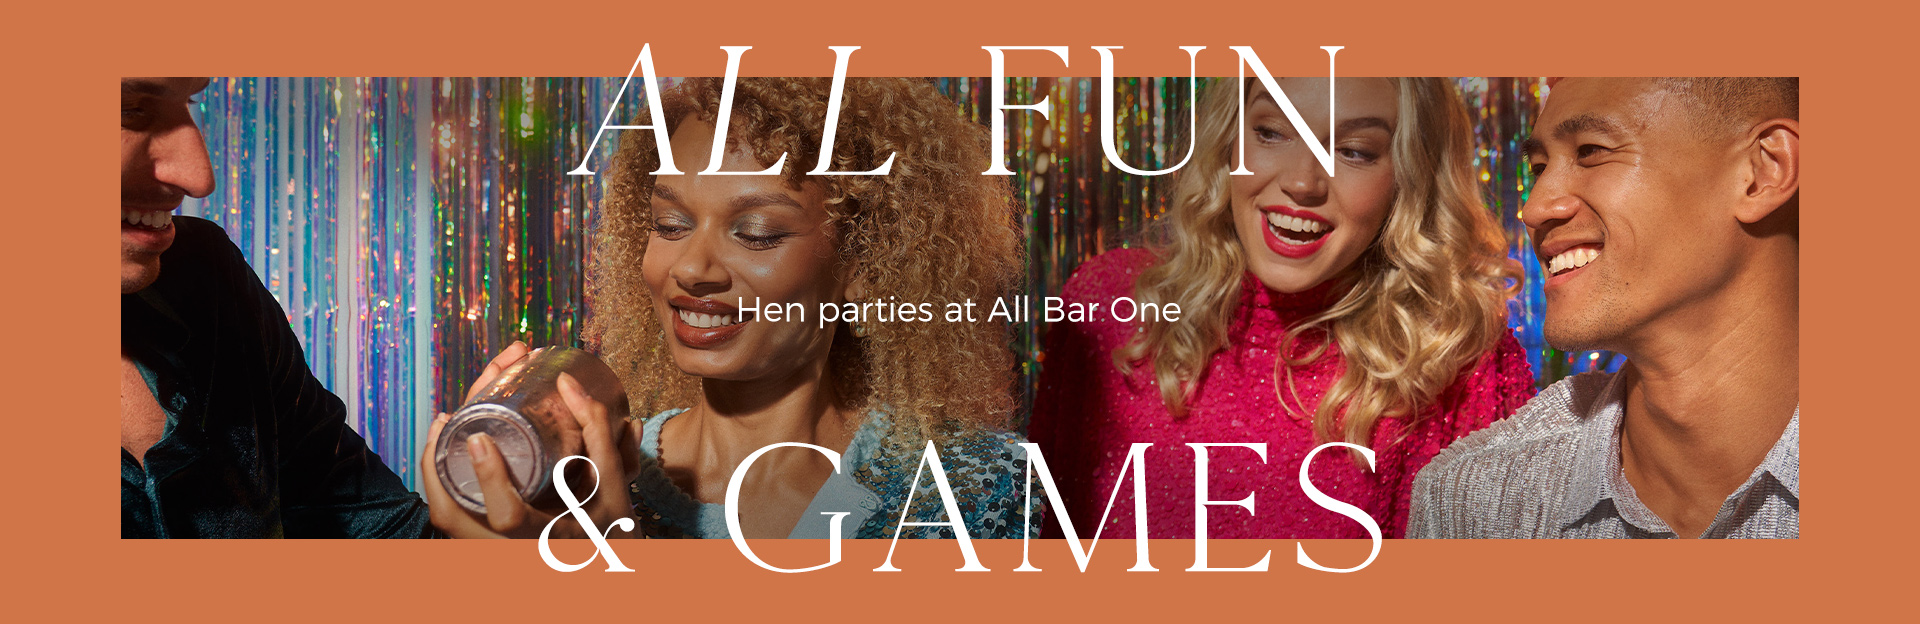 Hen parties at All Bar One Sheffield